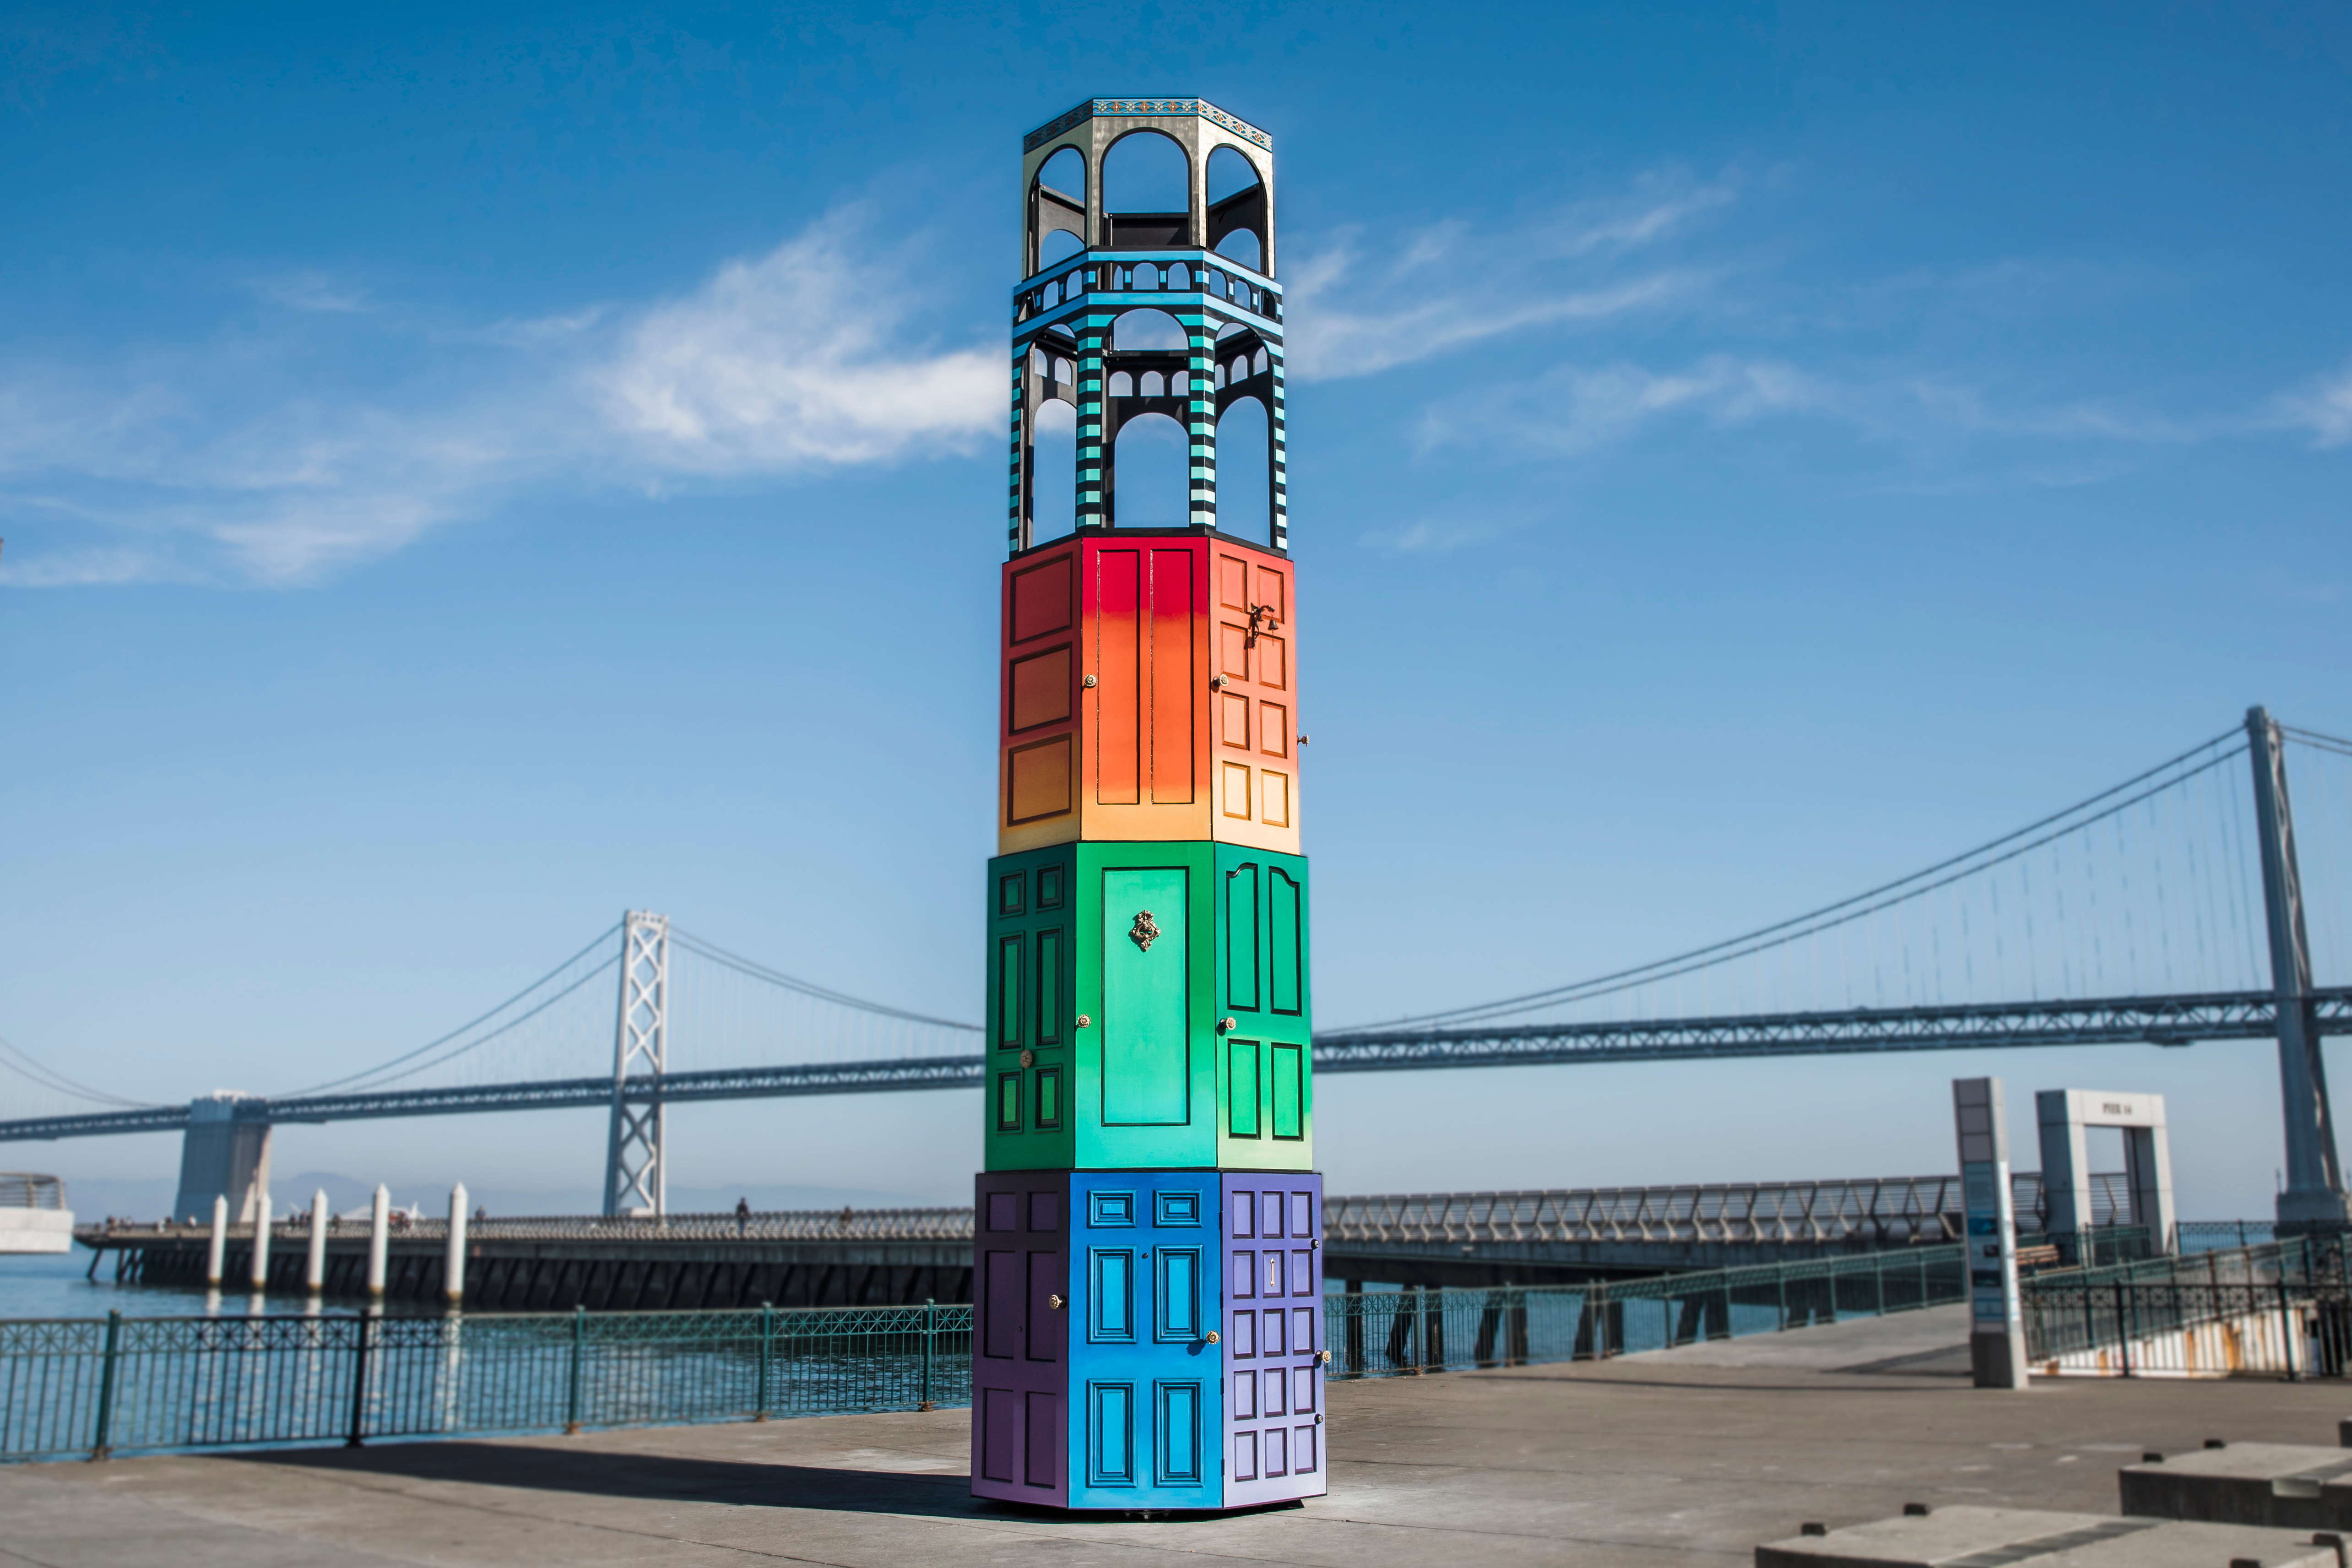 San Francisco's Welcome Tower